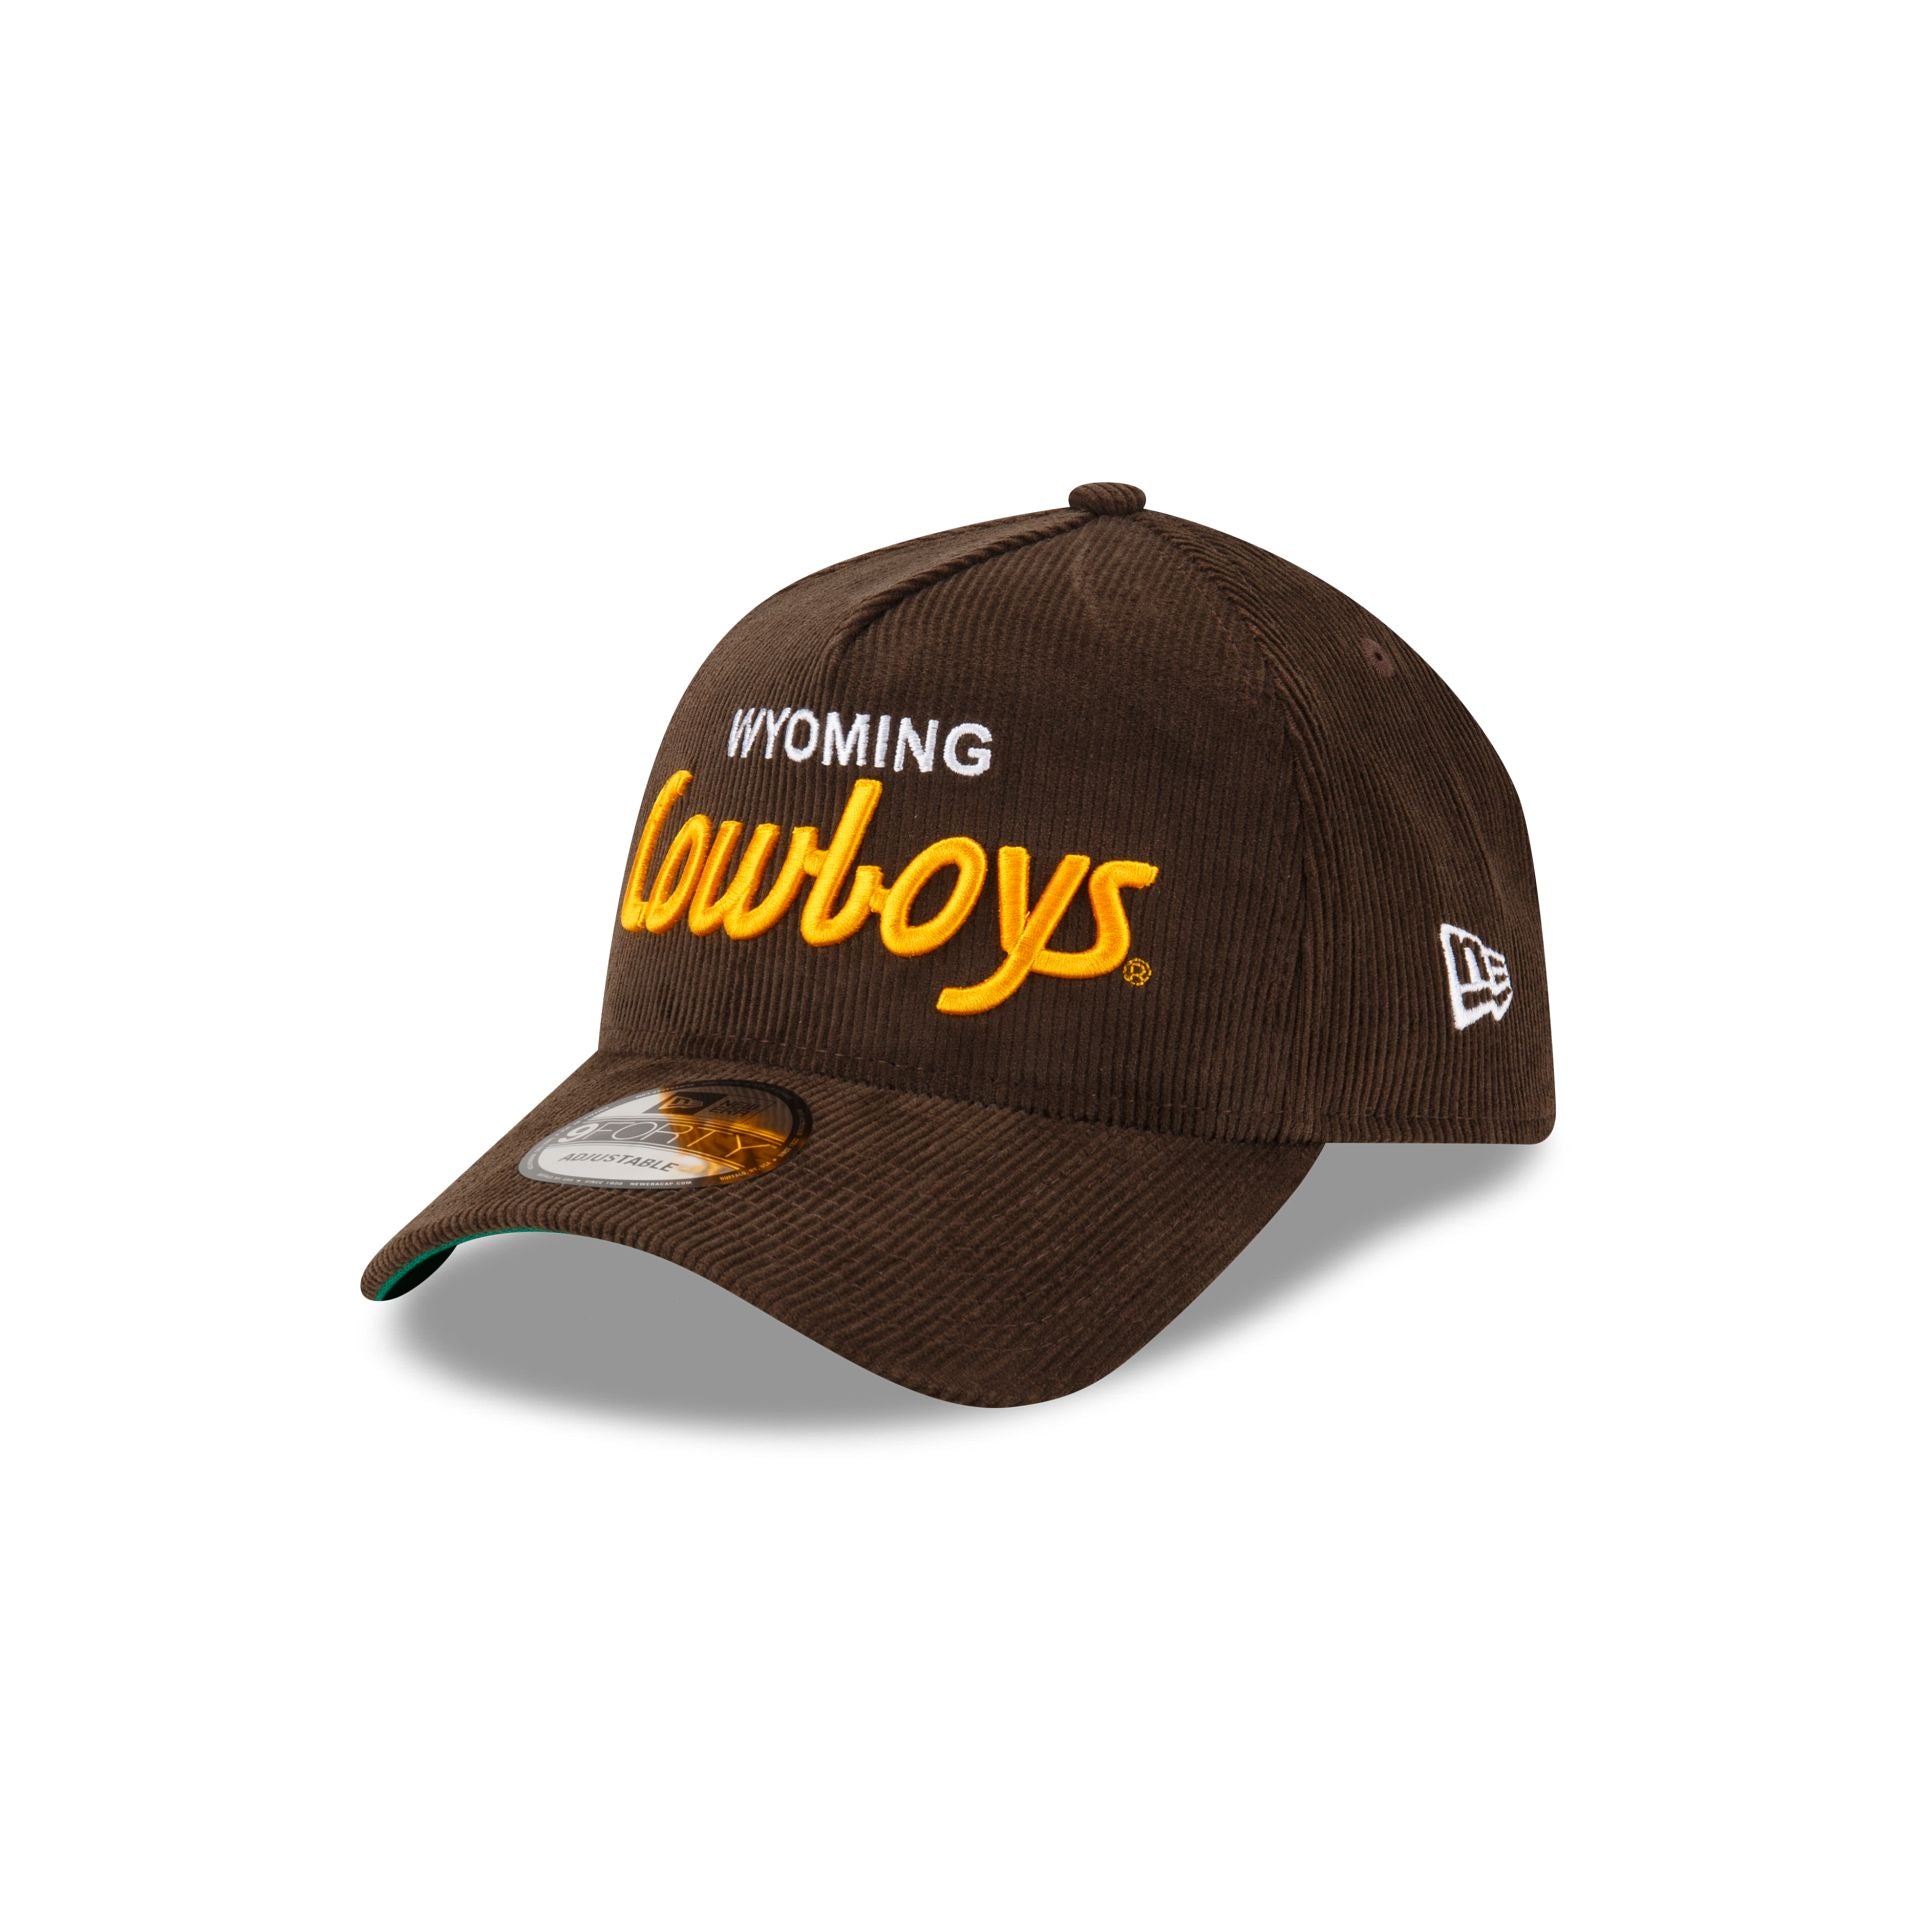 Wyoming Cowboys Collegiate Corduroy 9FORTY A-Frame Snapback – New